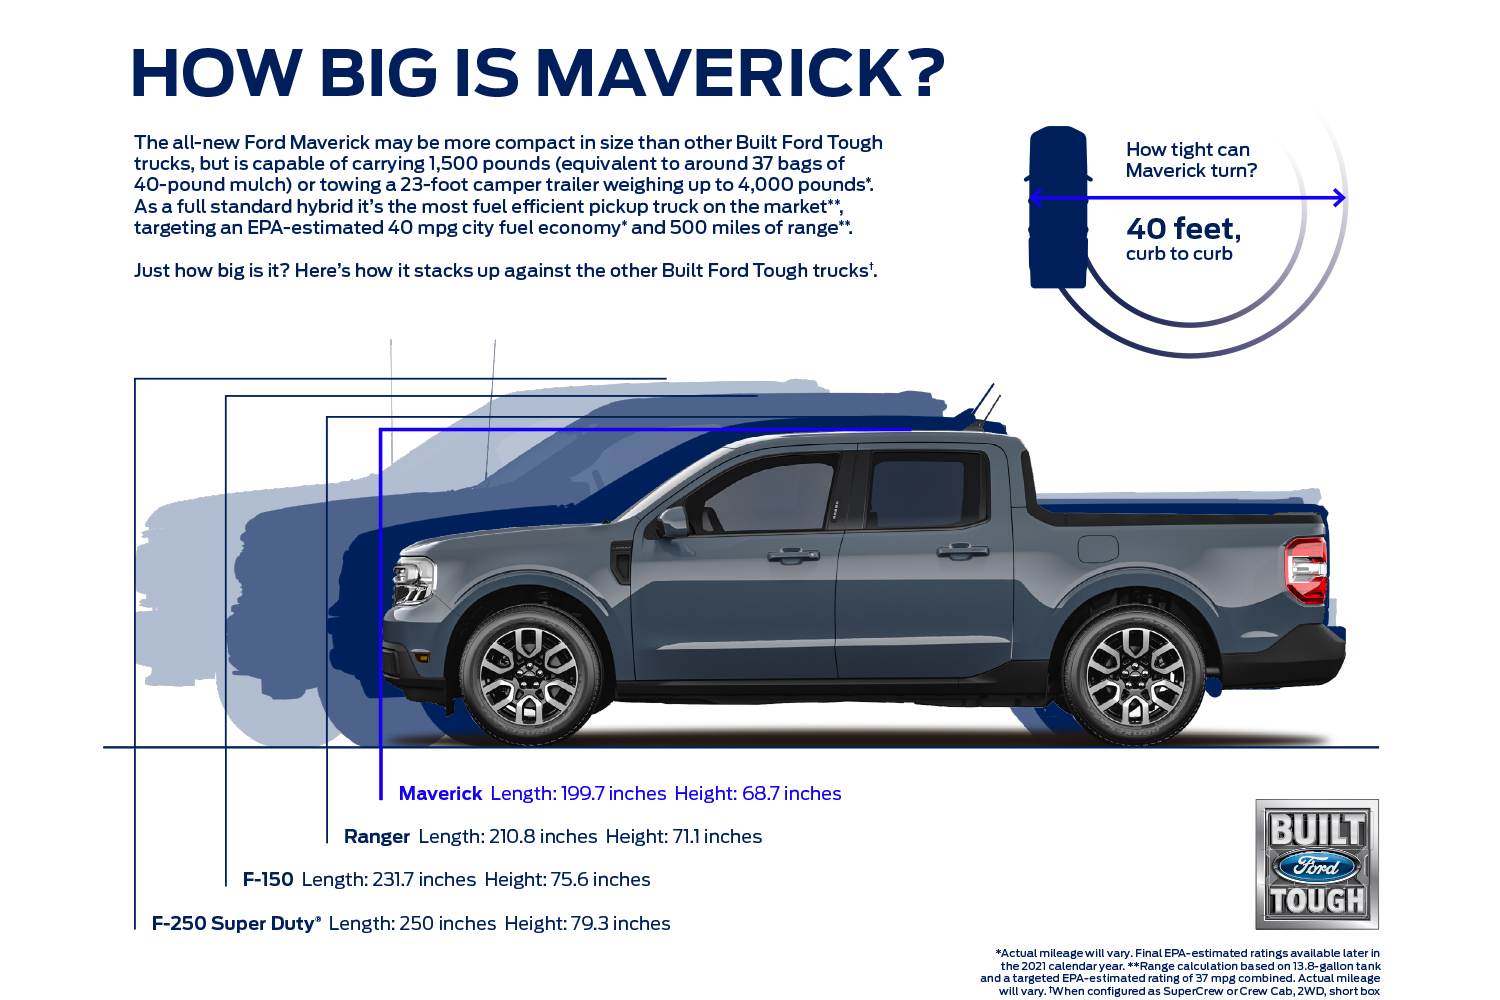 A Ford graphic that shows how big the Maverick truck is compared to other pickups